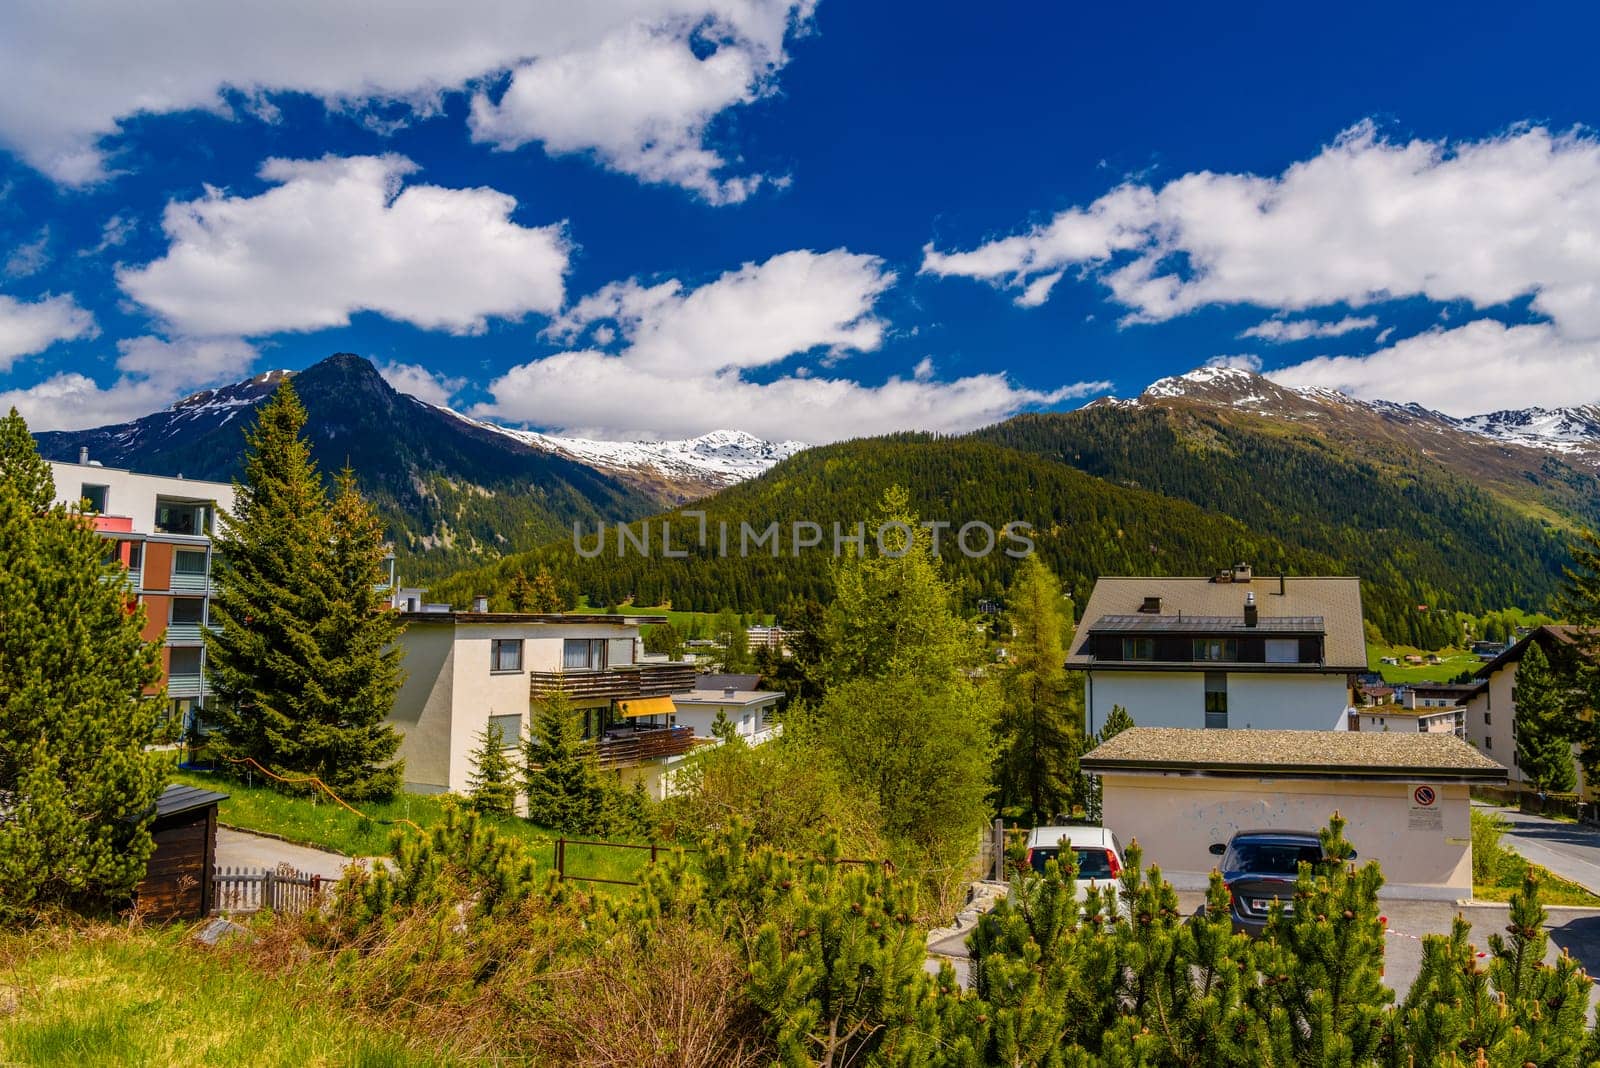 Houses in town village in Alps mountains, Davos, Graubuenden, Switzerland by Eagle2308